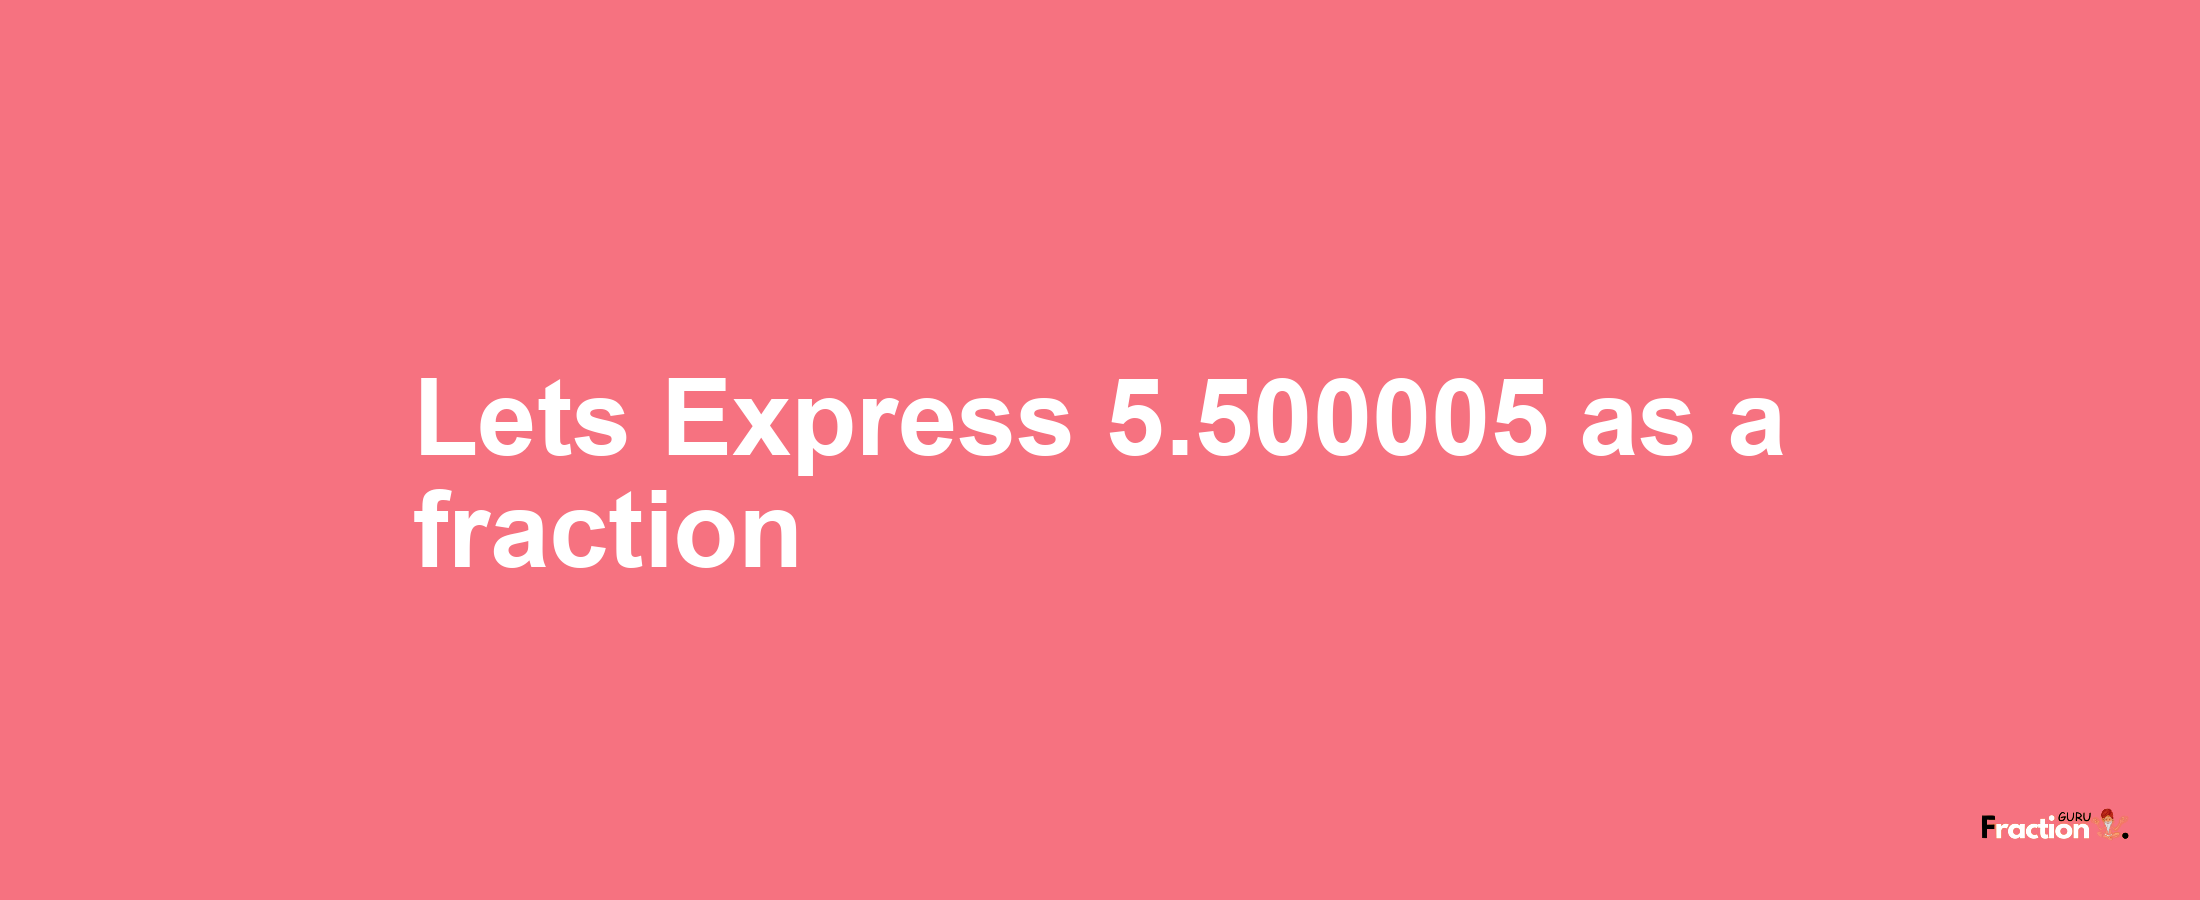 Lets Express 5.500005 as afraction